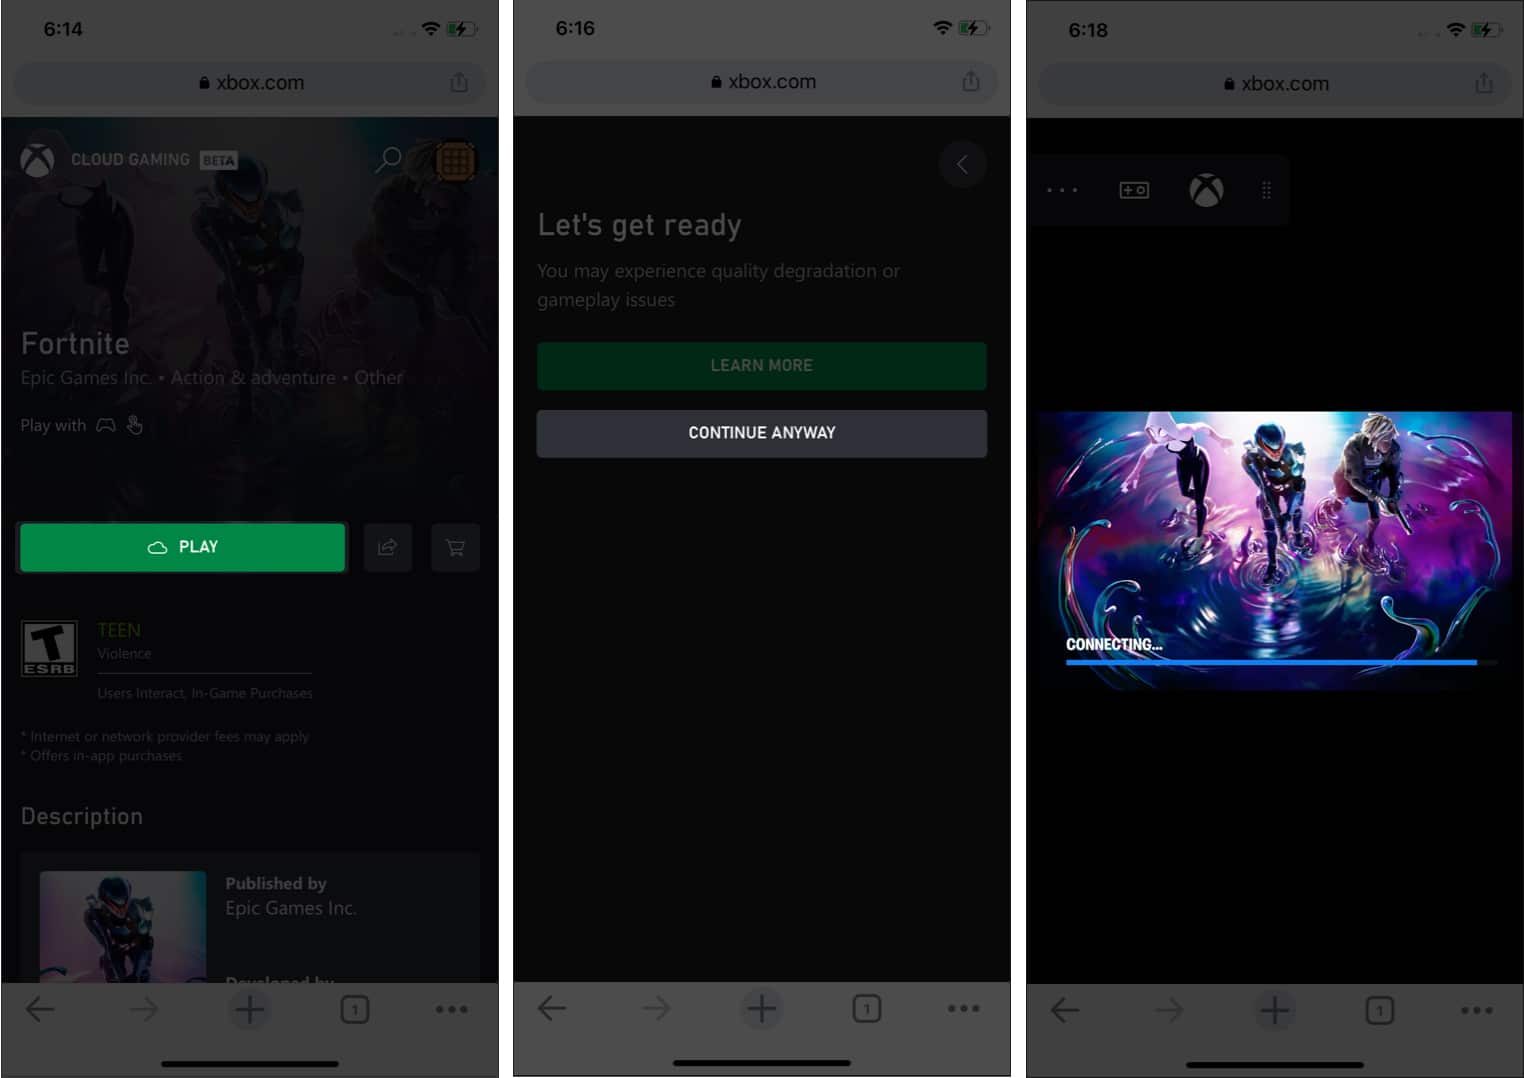 Play Fortnite on iPhone using Xbox Cloud Gaming